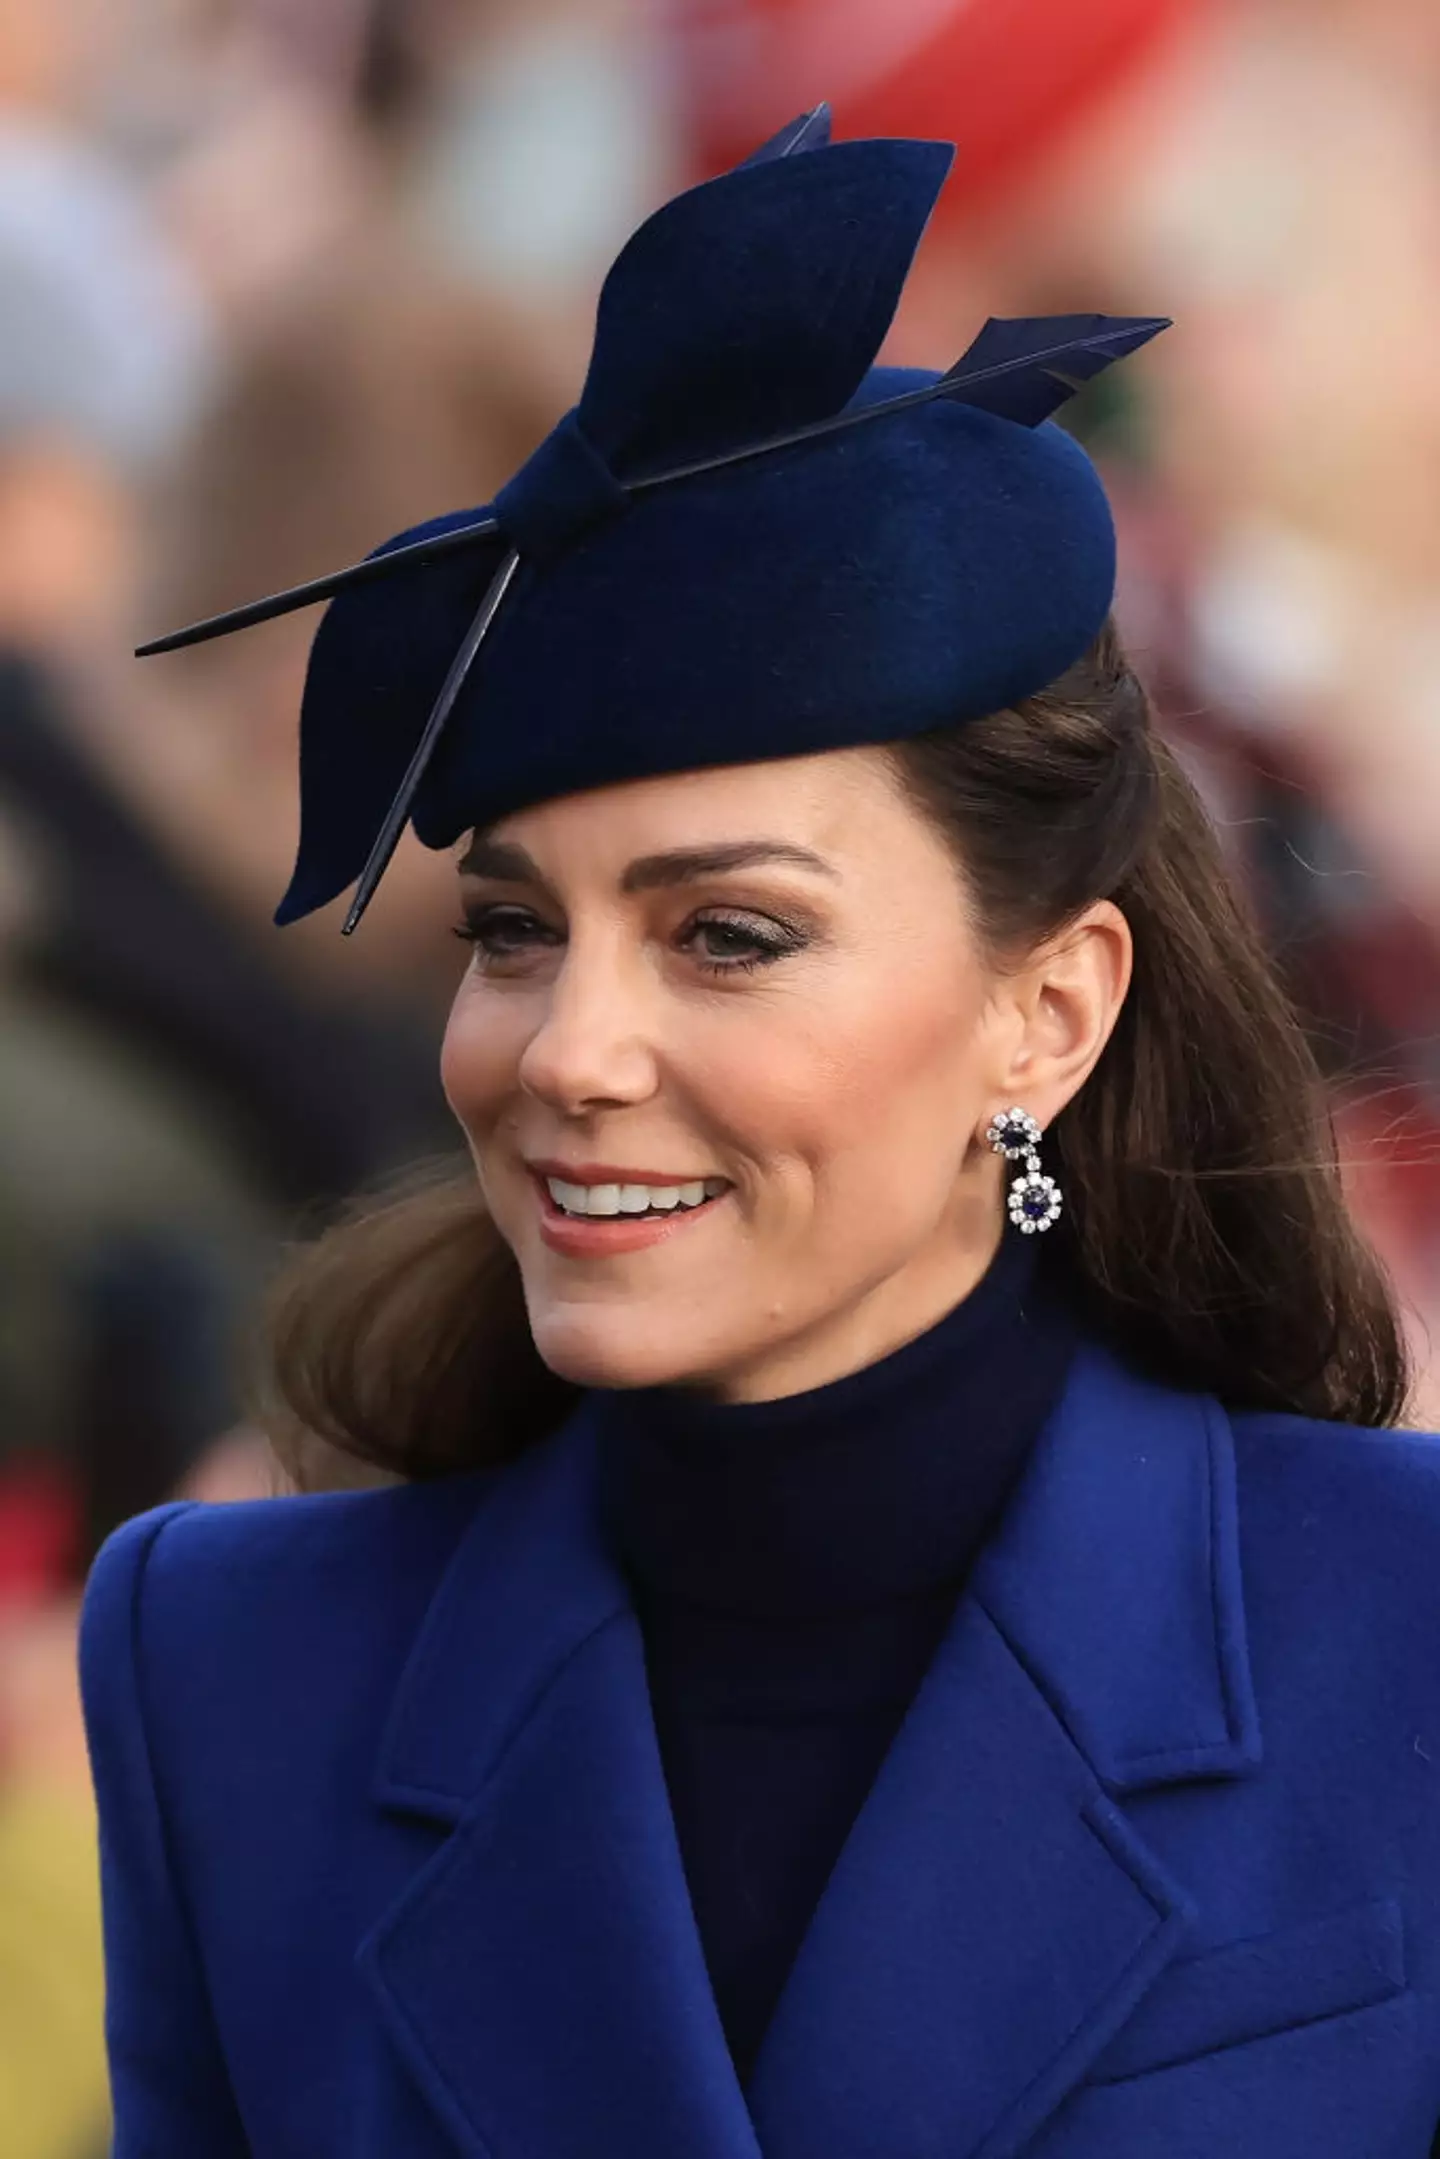 Kate Middleton will not be played by Sheridan Smith in an upcoming series.